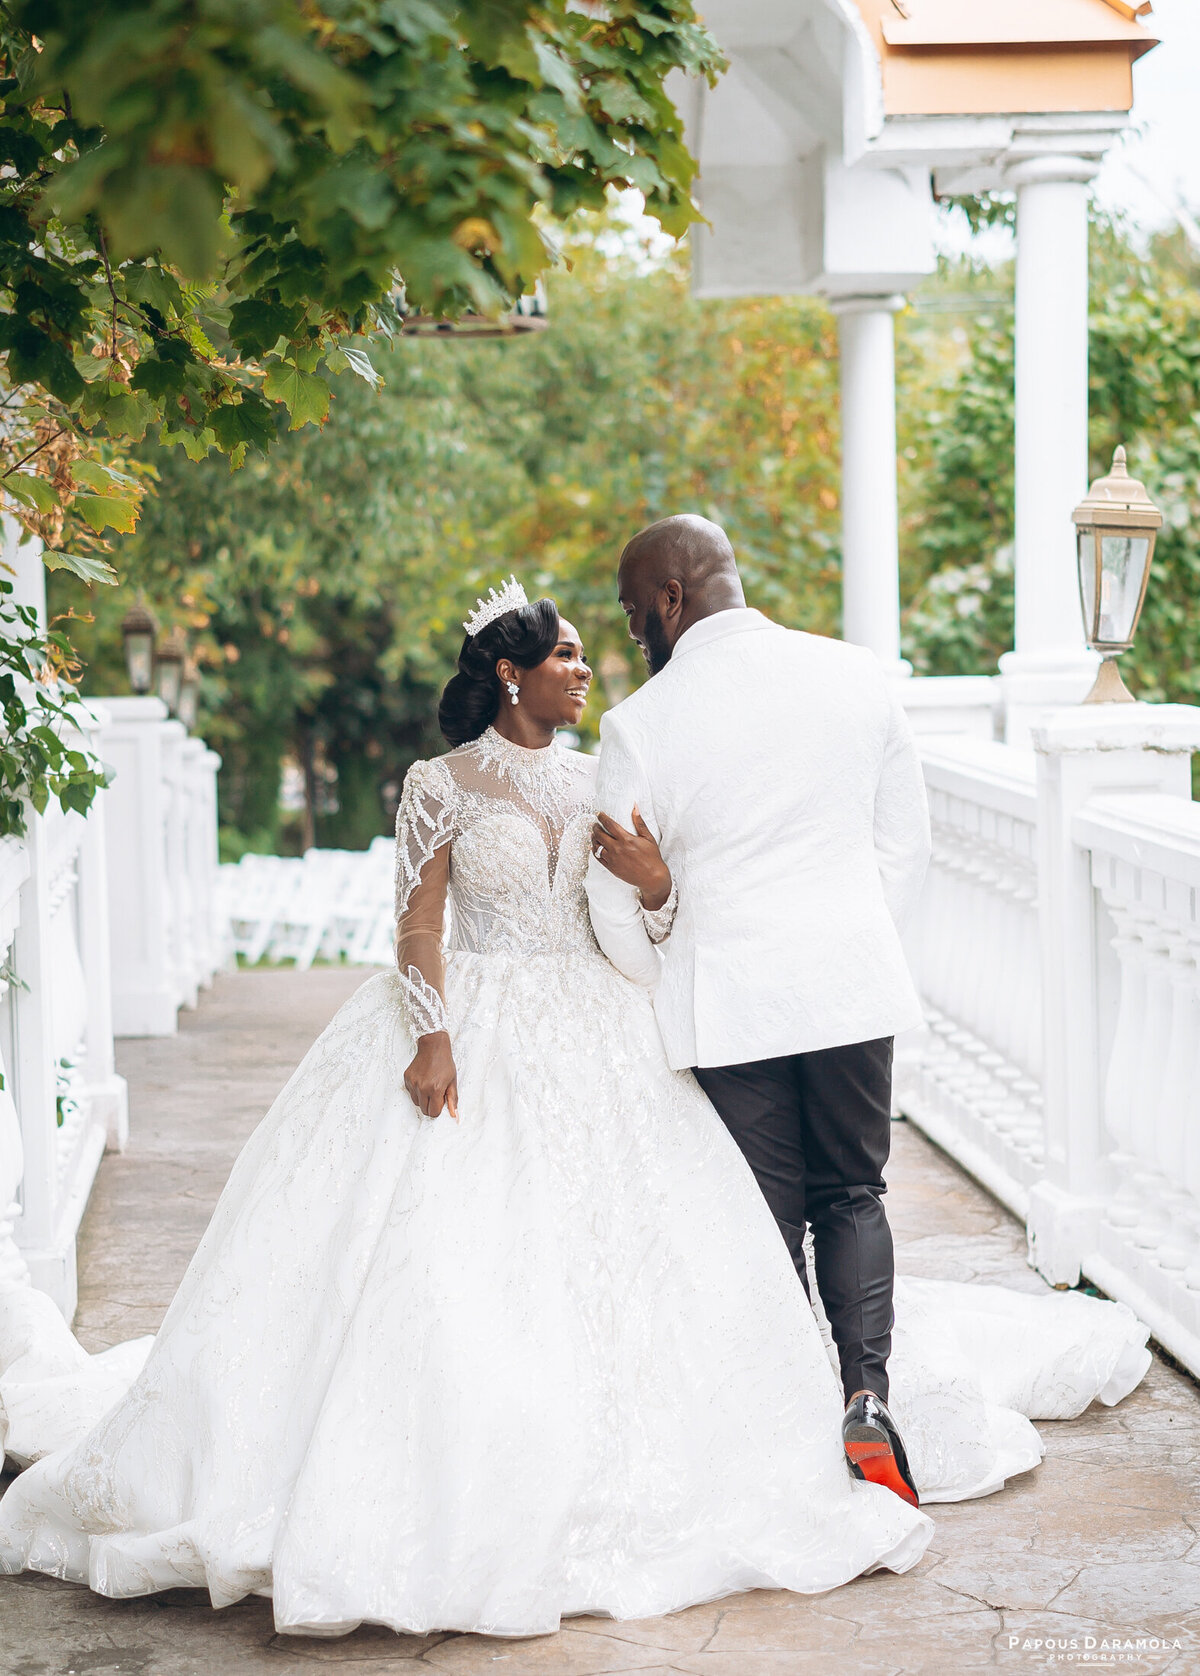 Abigail and Abije Oruka Events Papouse photographer Wedding event planners Toronto planner African Nigerian Eyitayo Dada Dara Ayoola outdoor ceremony floral princess ballgown rolls royce groom suit potraits  paradise banquet hall vaughn 203